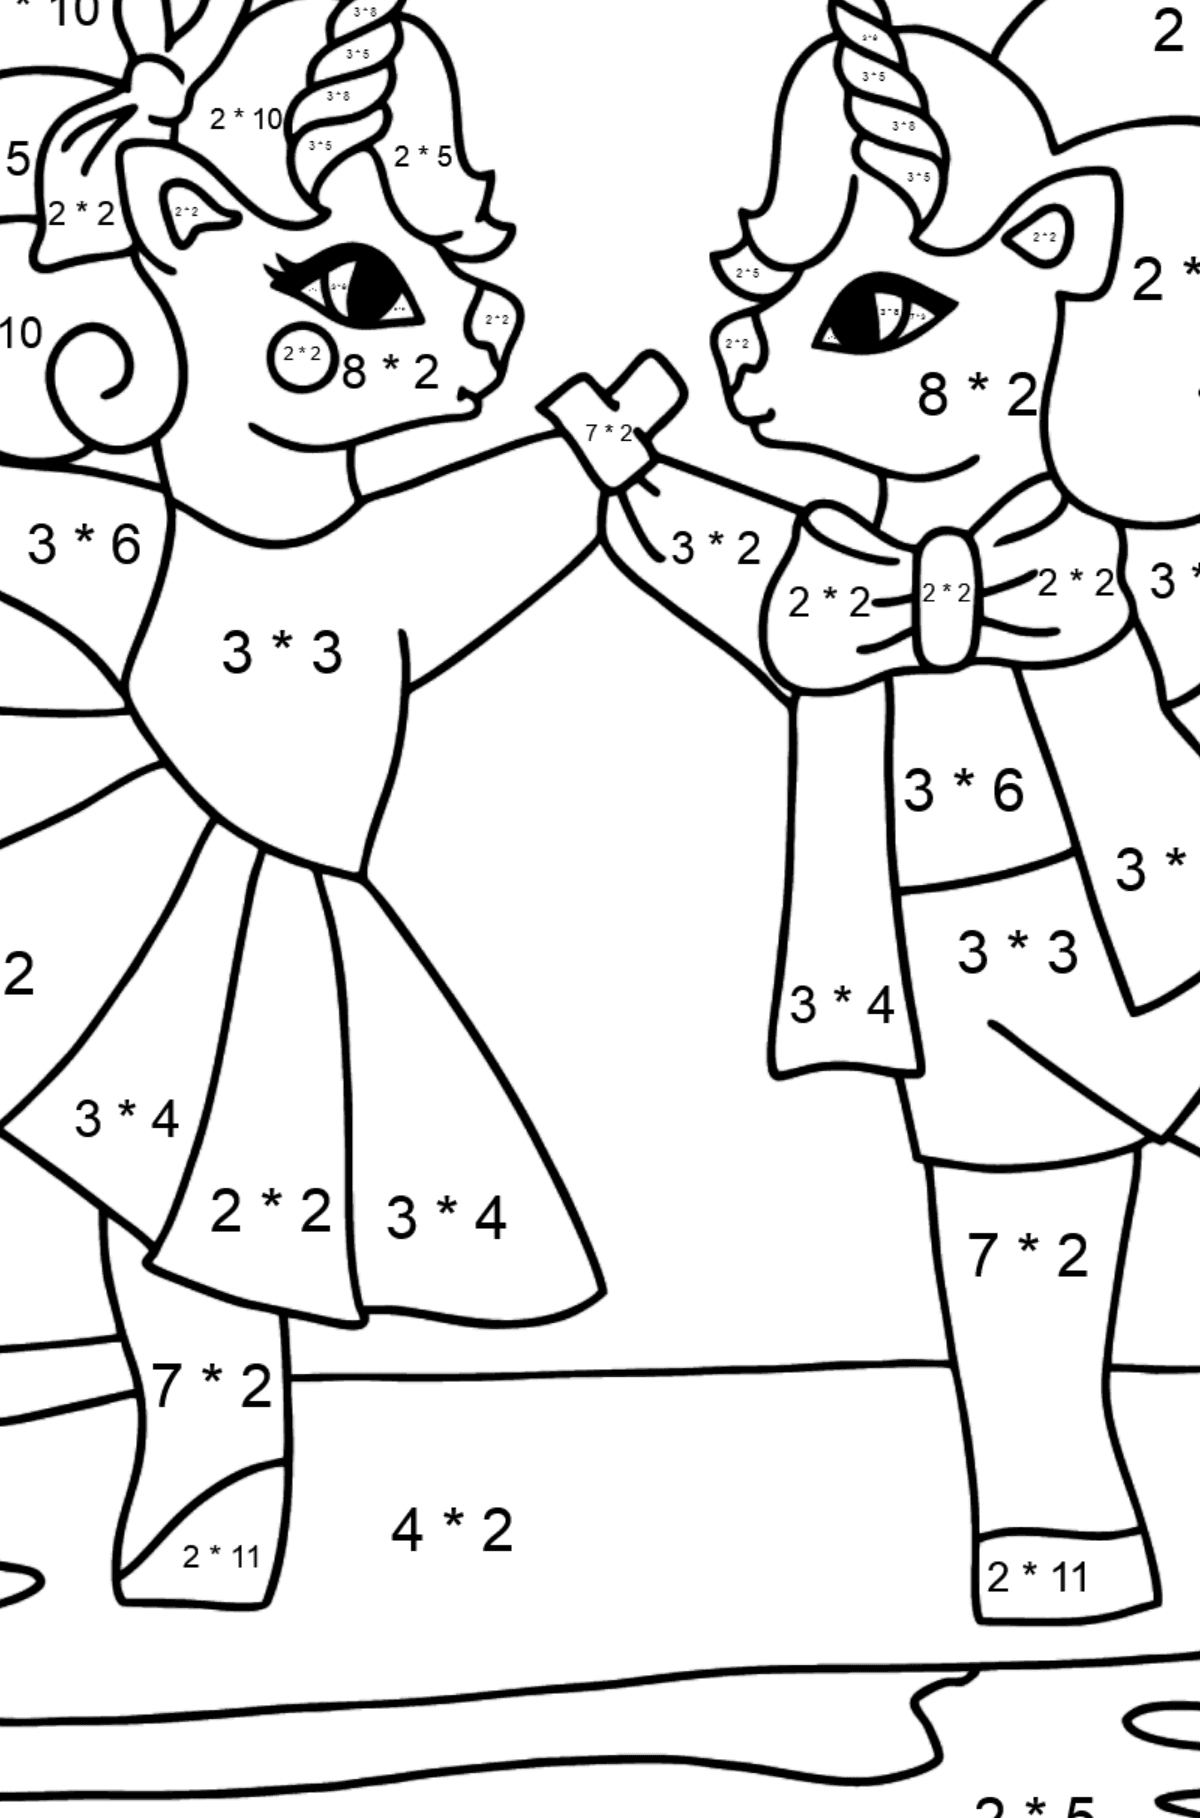 Coloring page Adorable Unicorns - Math Coloring - Multiplication for Kids